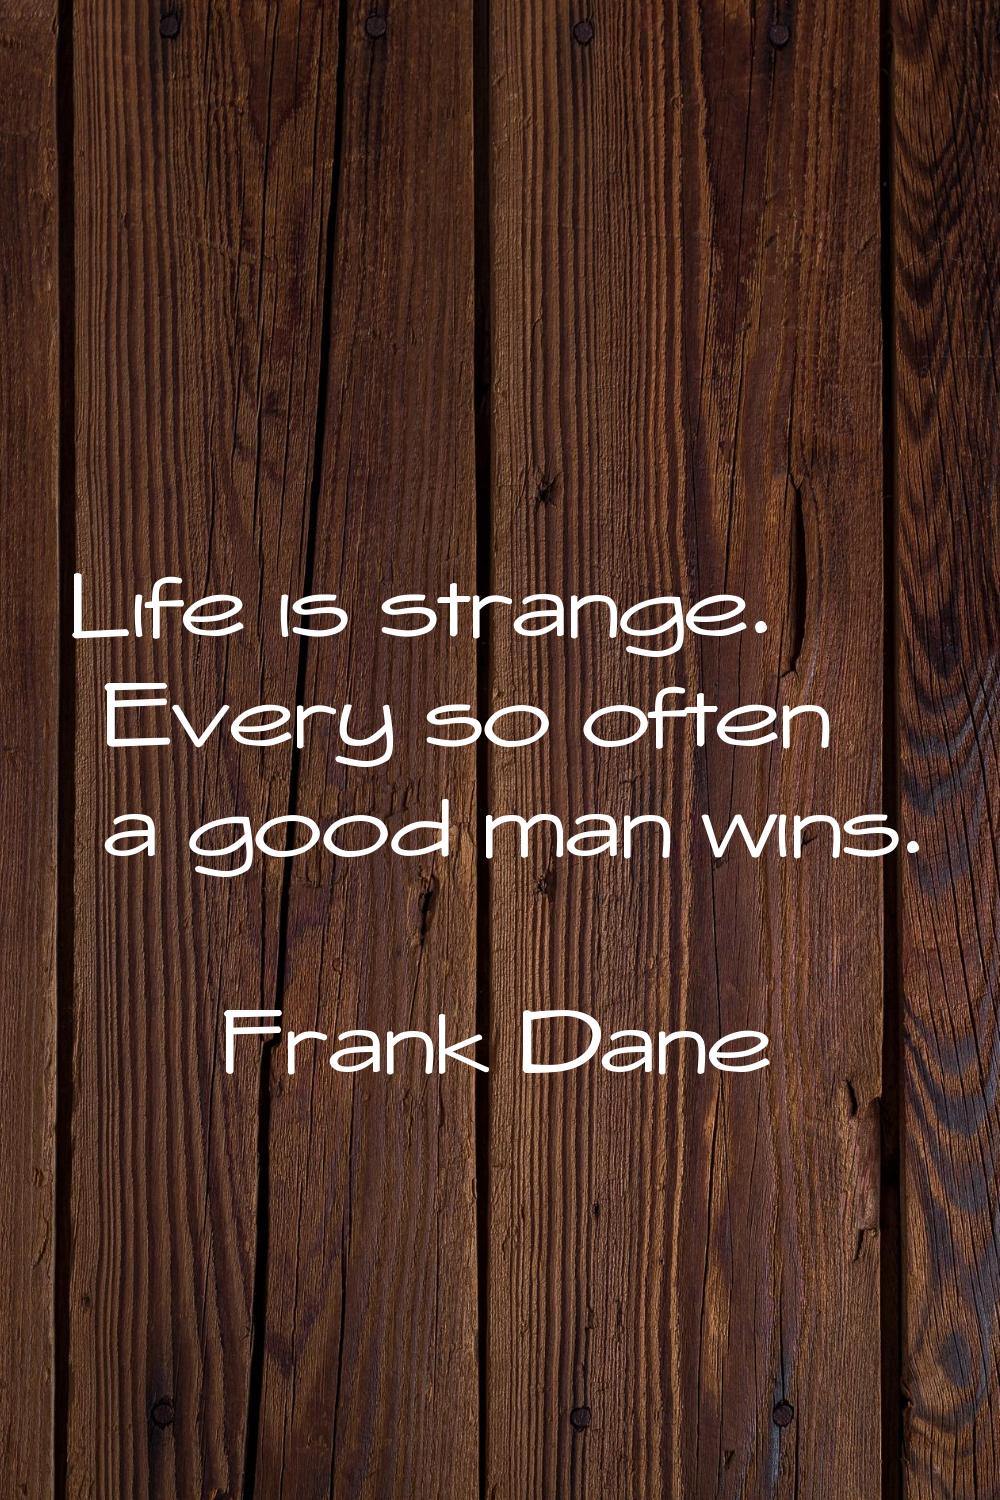 Life is strange. Every so often a good man wins.